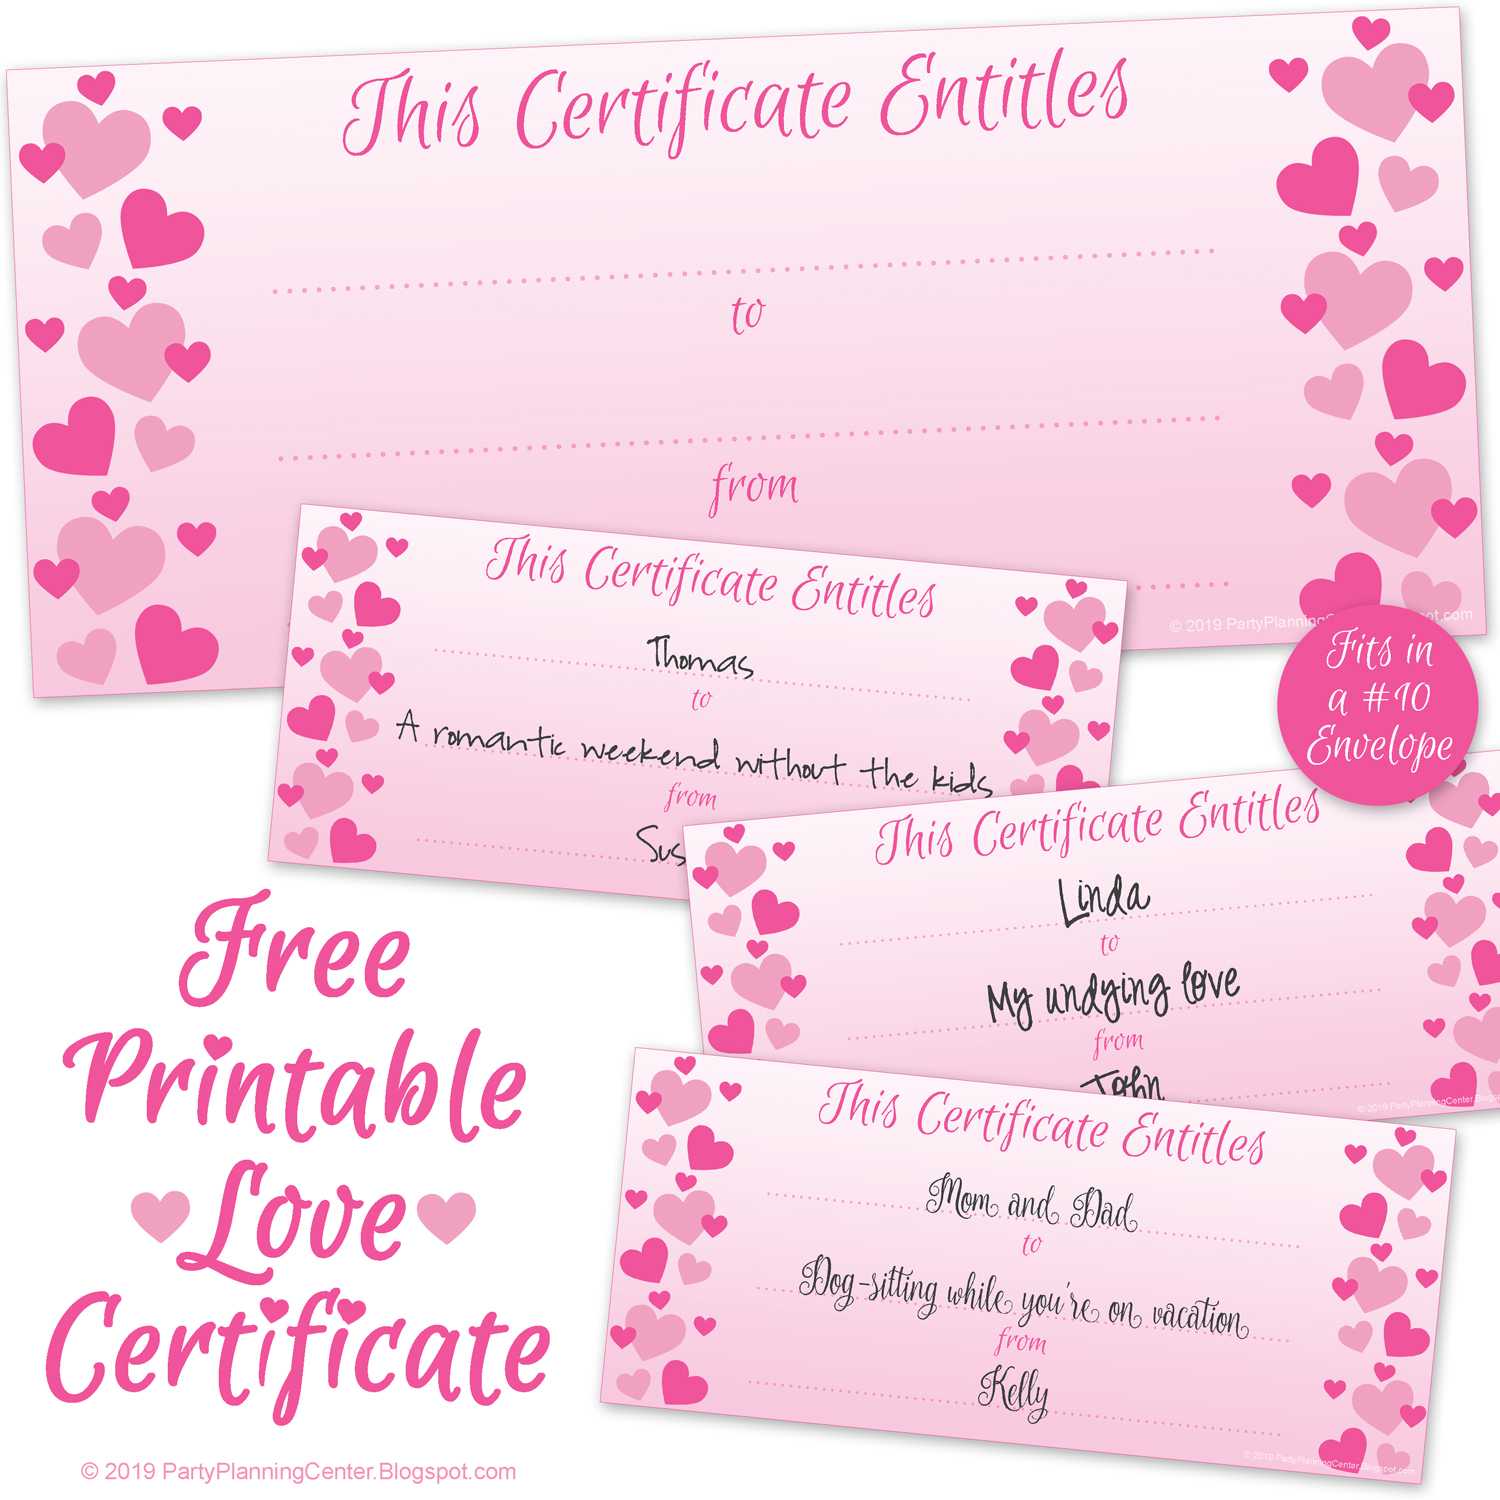 Can't Find Substitution For Tag [Post.body]–> Printable Intended For Love Certificate Templates